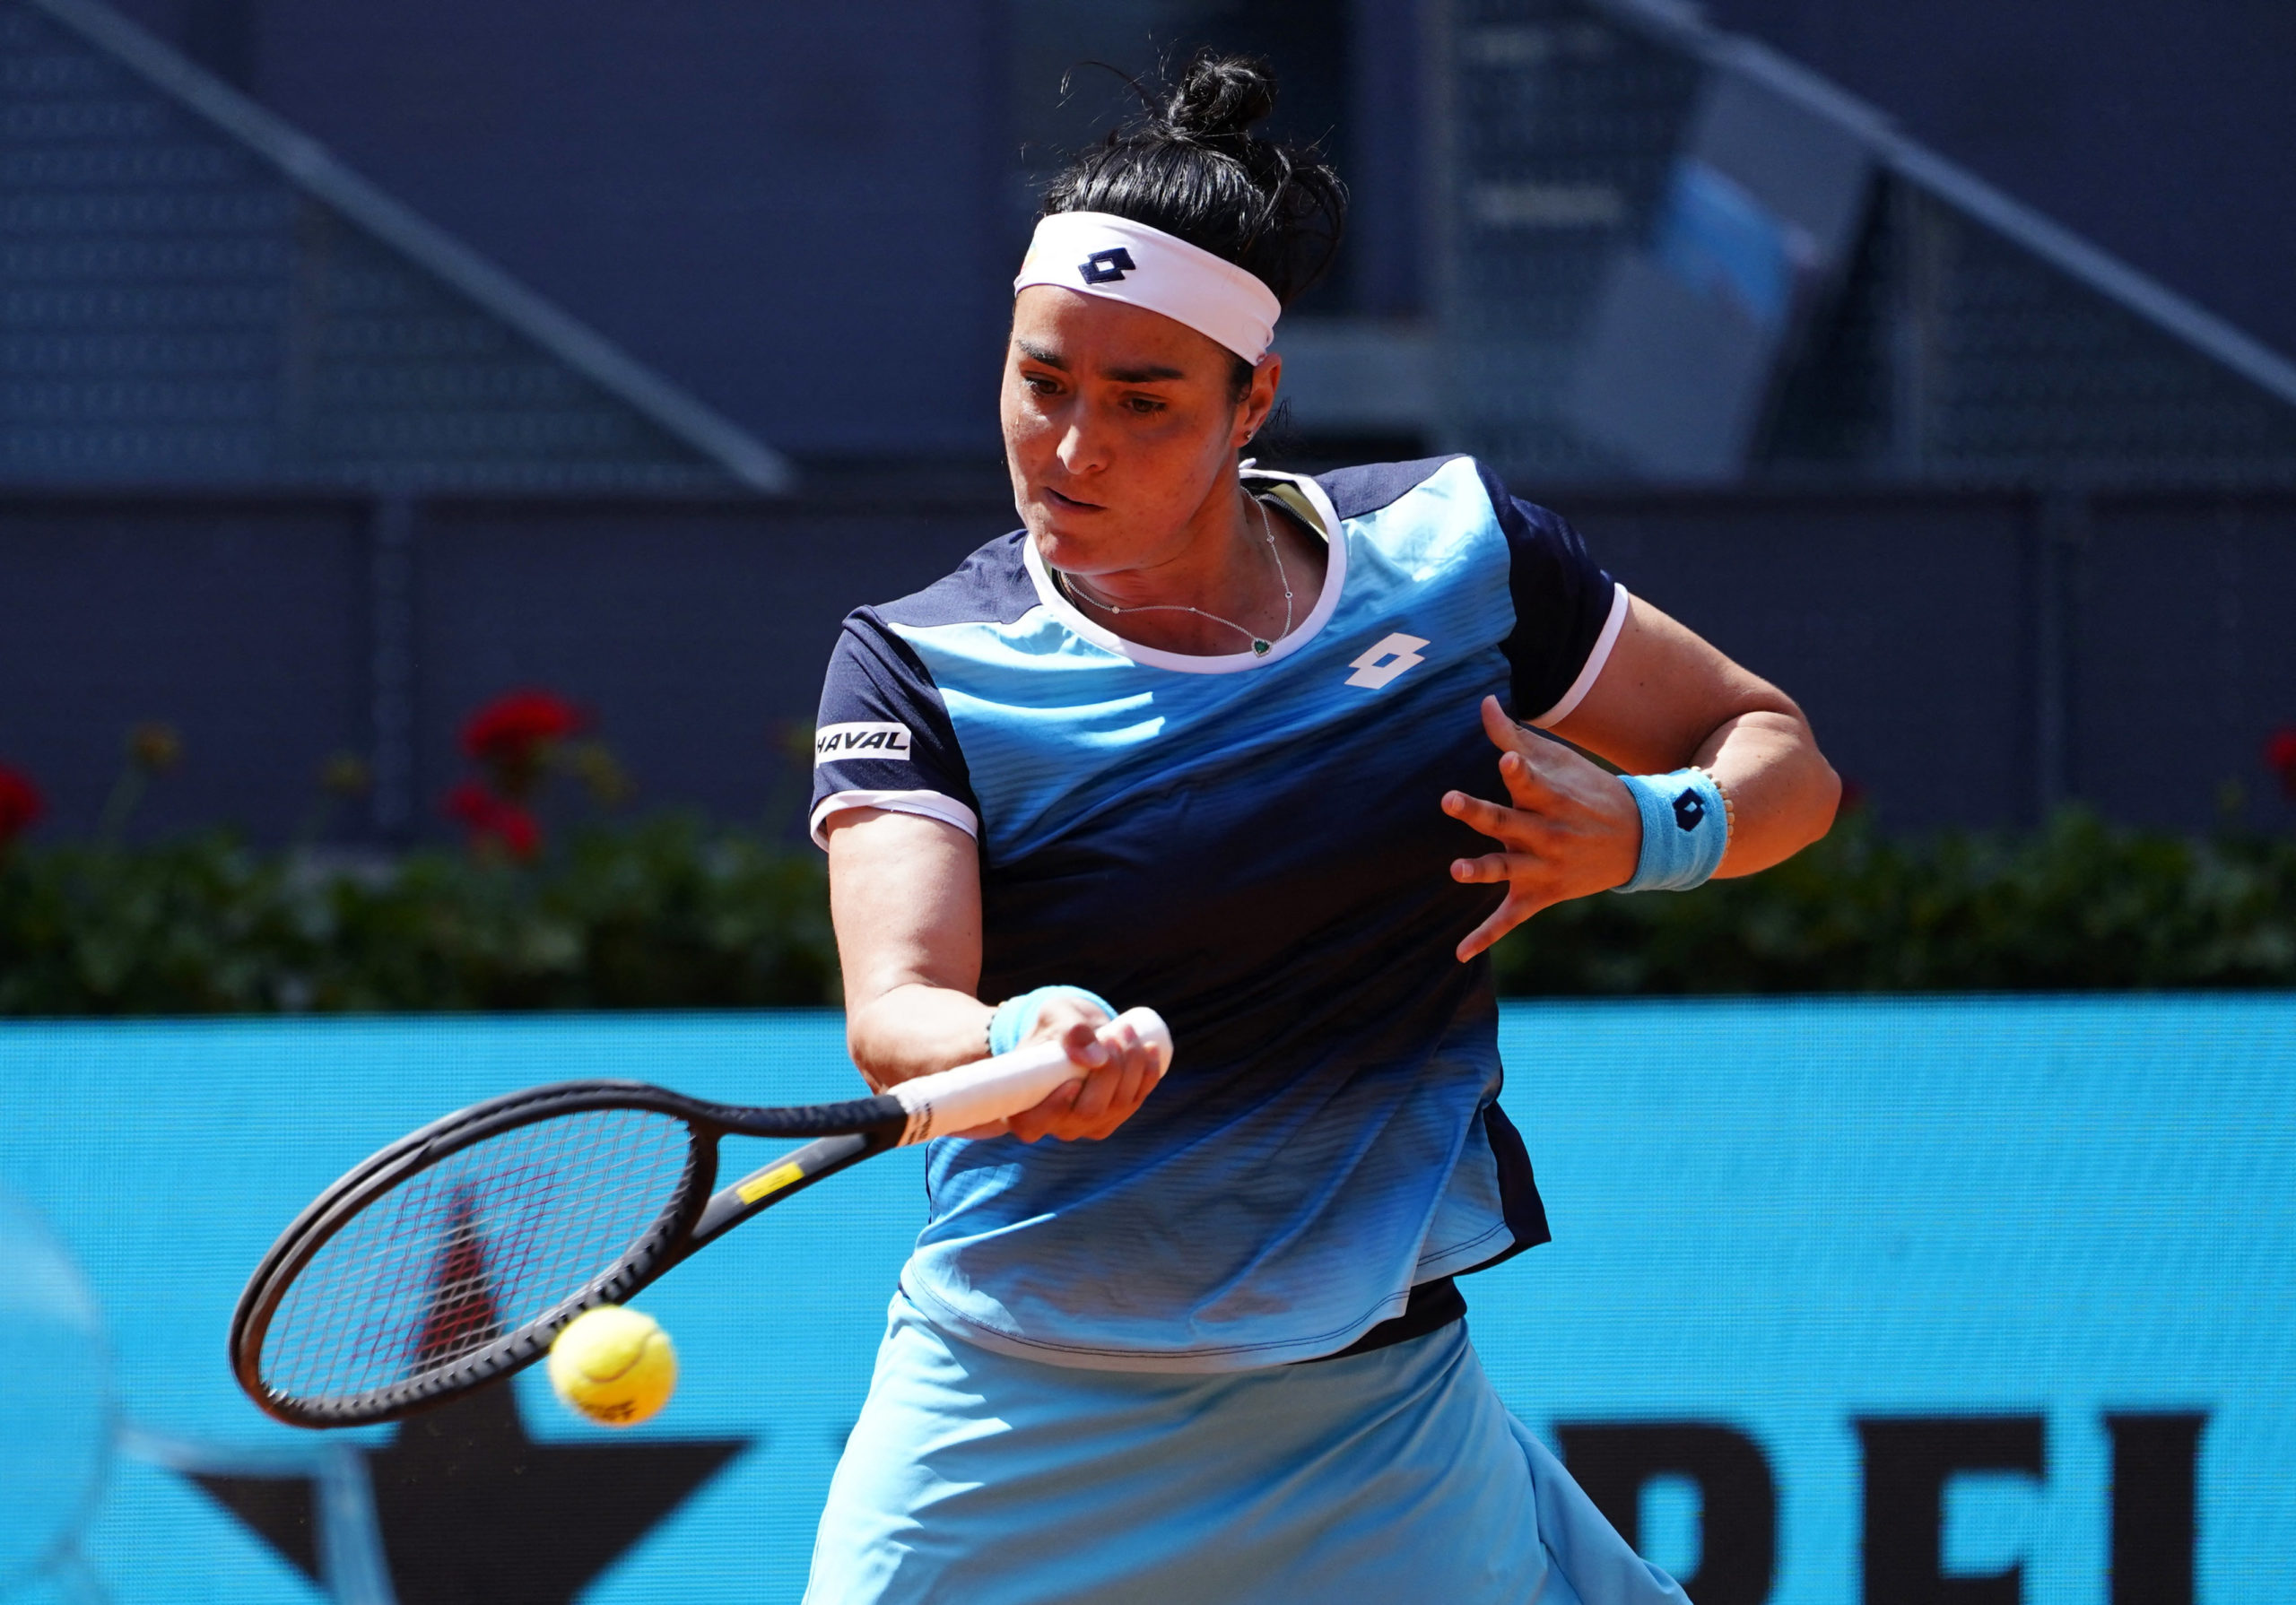 Tennis - WTA Masters 1000 - Madrid Open - Caja Magica, Madrid, Spain - May 4, 2022 Tunisia's Ons Jabeur in action during her quarter final match against Romania's Simona Halep 